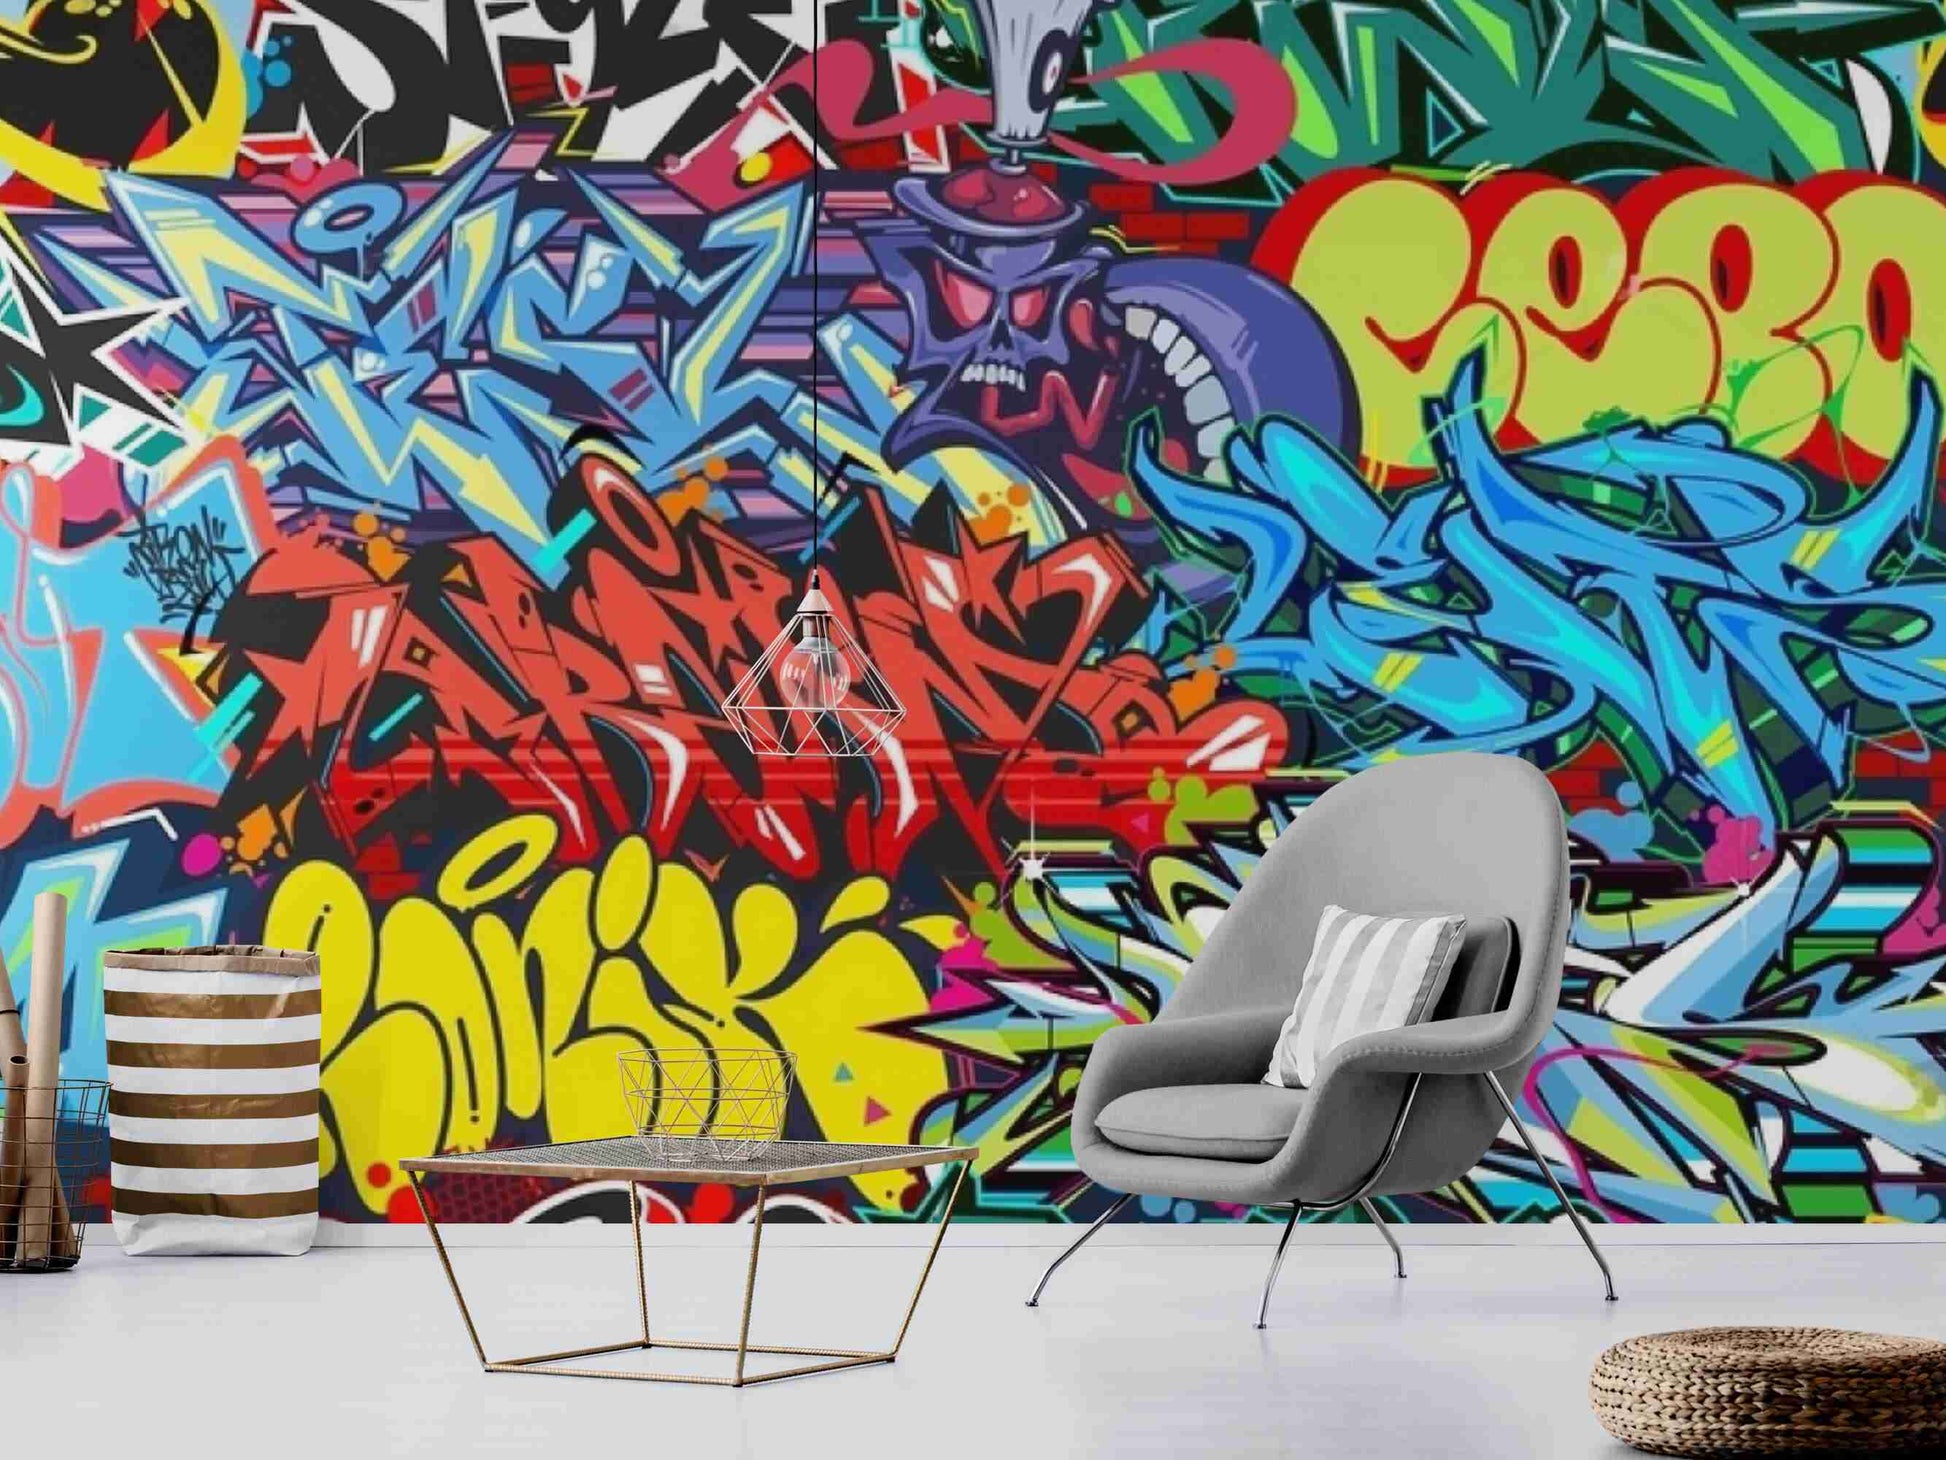 An image of a wallpaper with a graffiti mural design, featuring a colorful and abstract mix of shapes, lines, and lettering in various shades of blue, pink, green, and yellow. The wallpaper is peel and stick, making it easy to install and remove without causing damage or leaving residue on the wall surface. It is ideal for adding a bold and artistic statement to any room, such as a living room, bedroom, or entertainment area, where it can serve as a striking backdrop or accent wall.